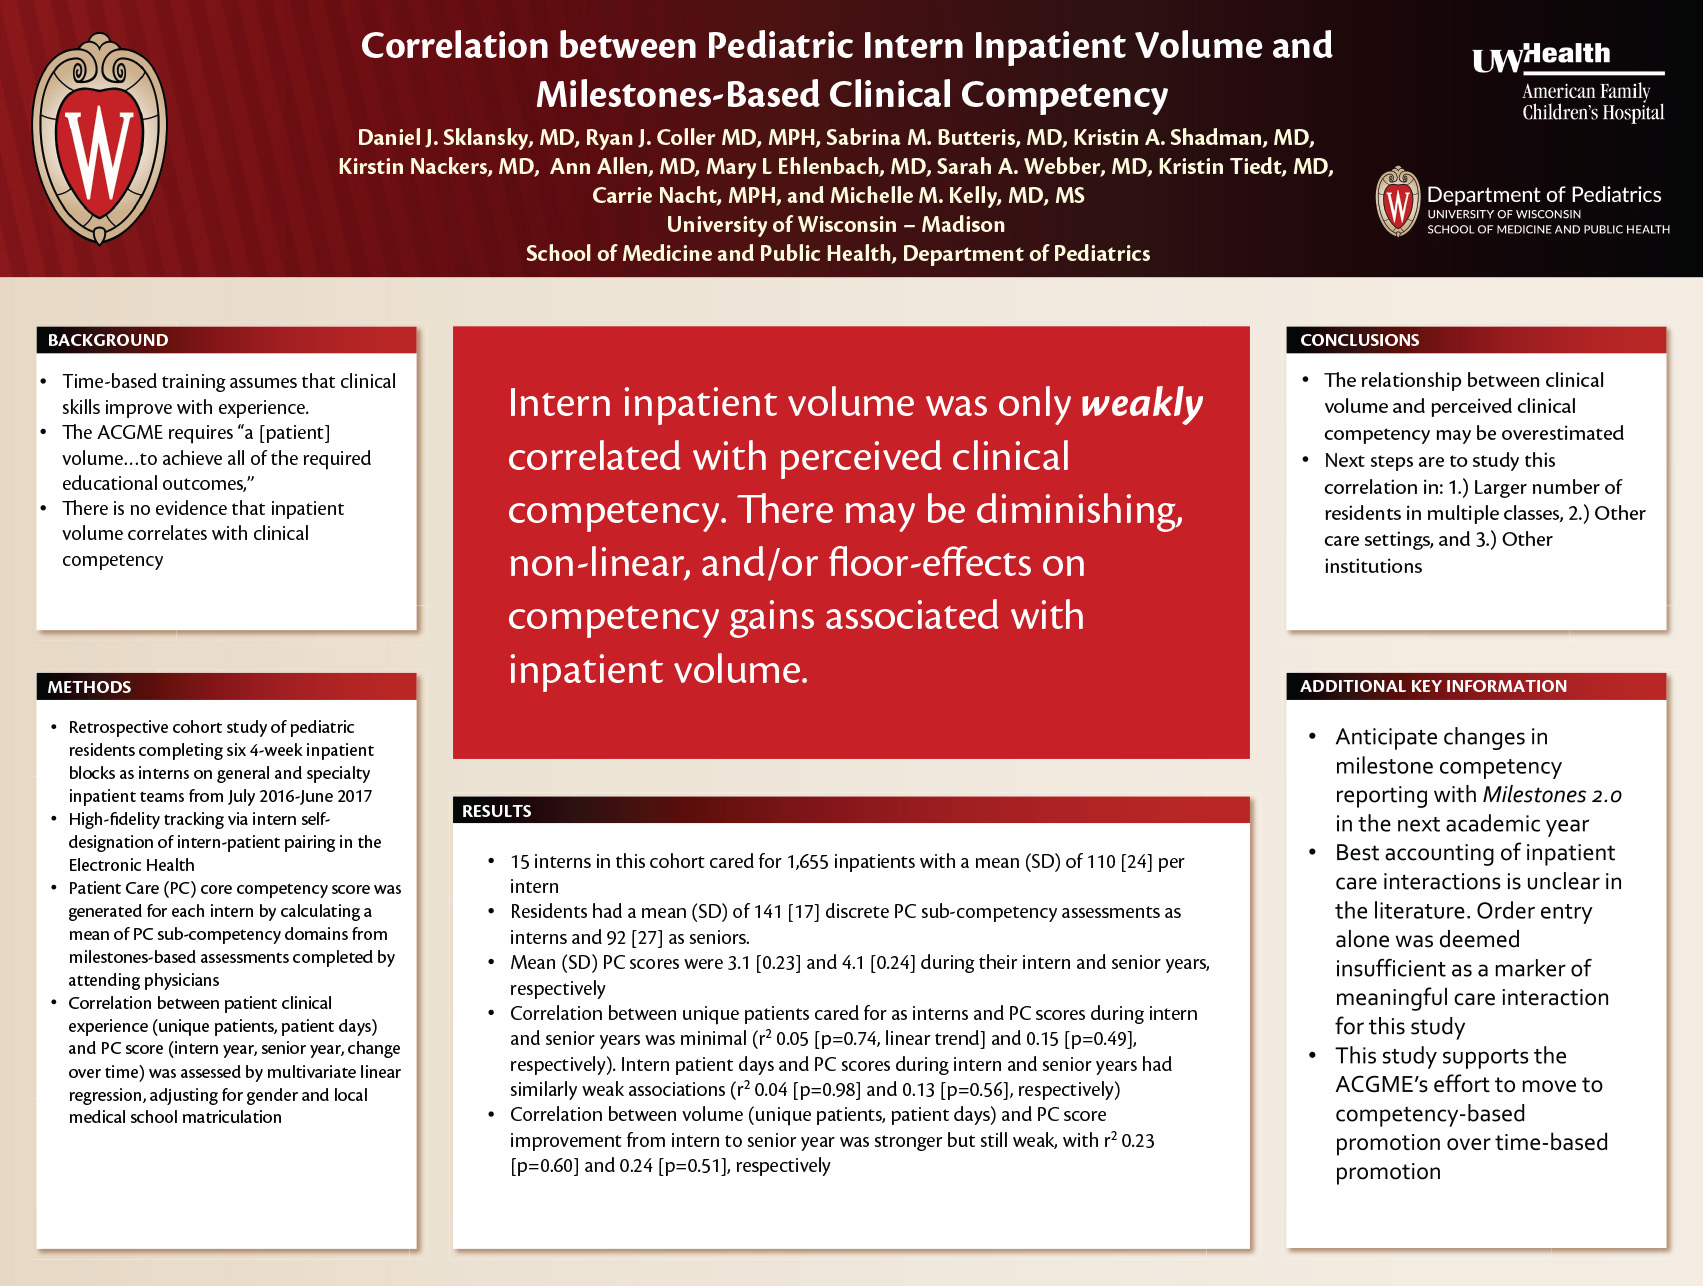 Correlation between Pediatric Intern Inpatient Volume and Milestones-Based Clinical Competency poster image